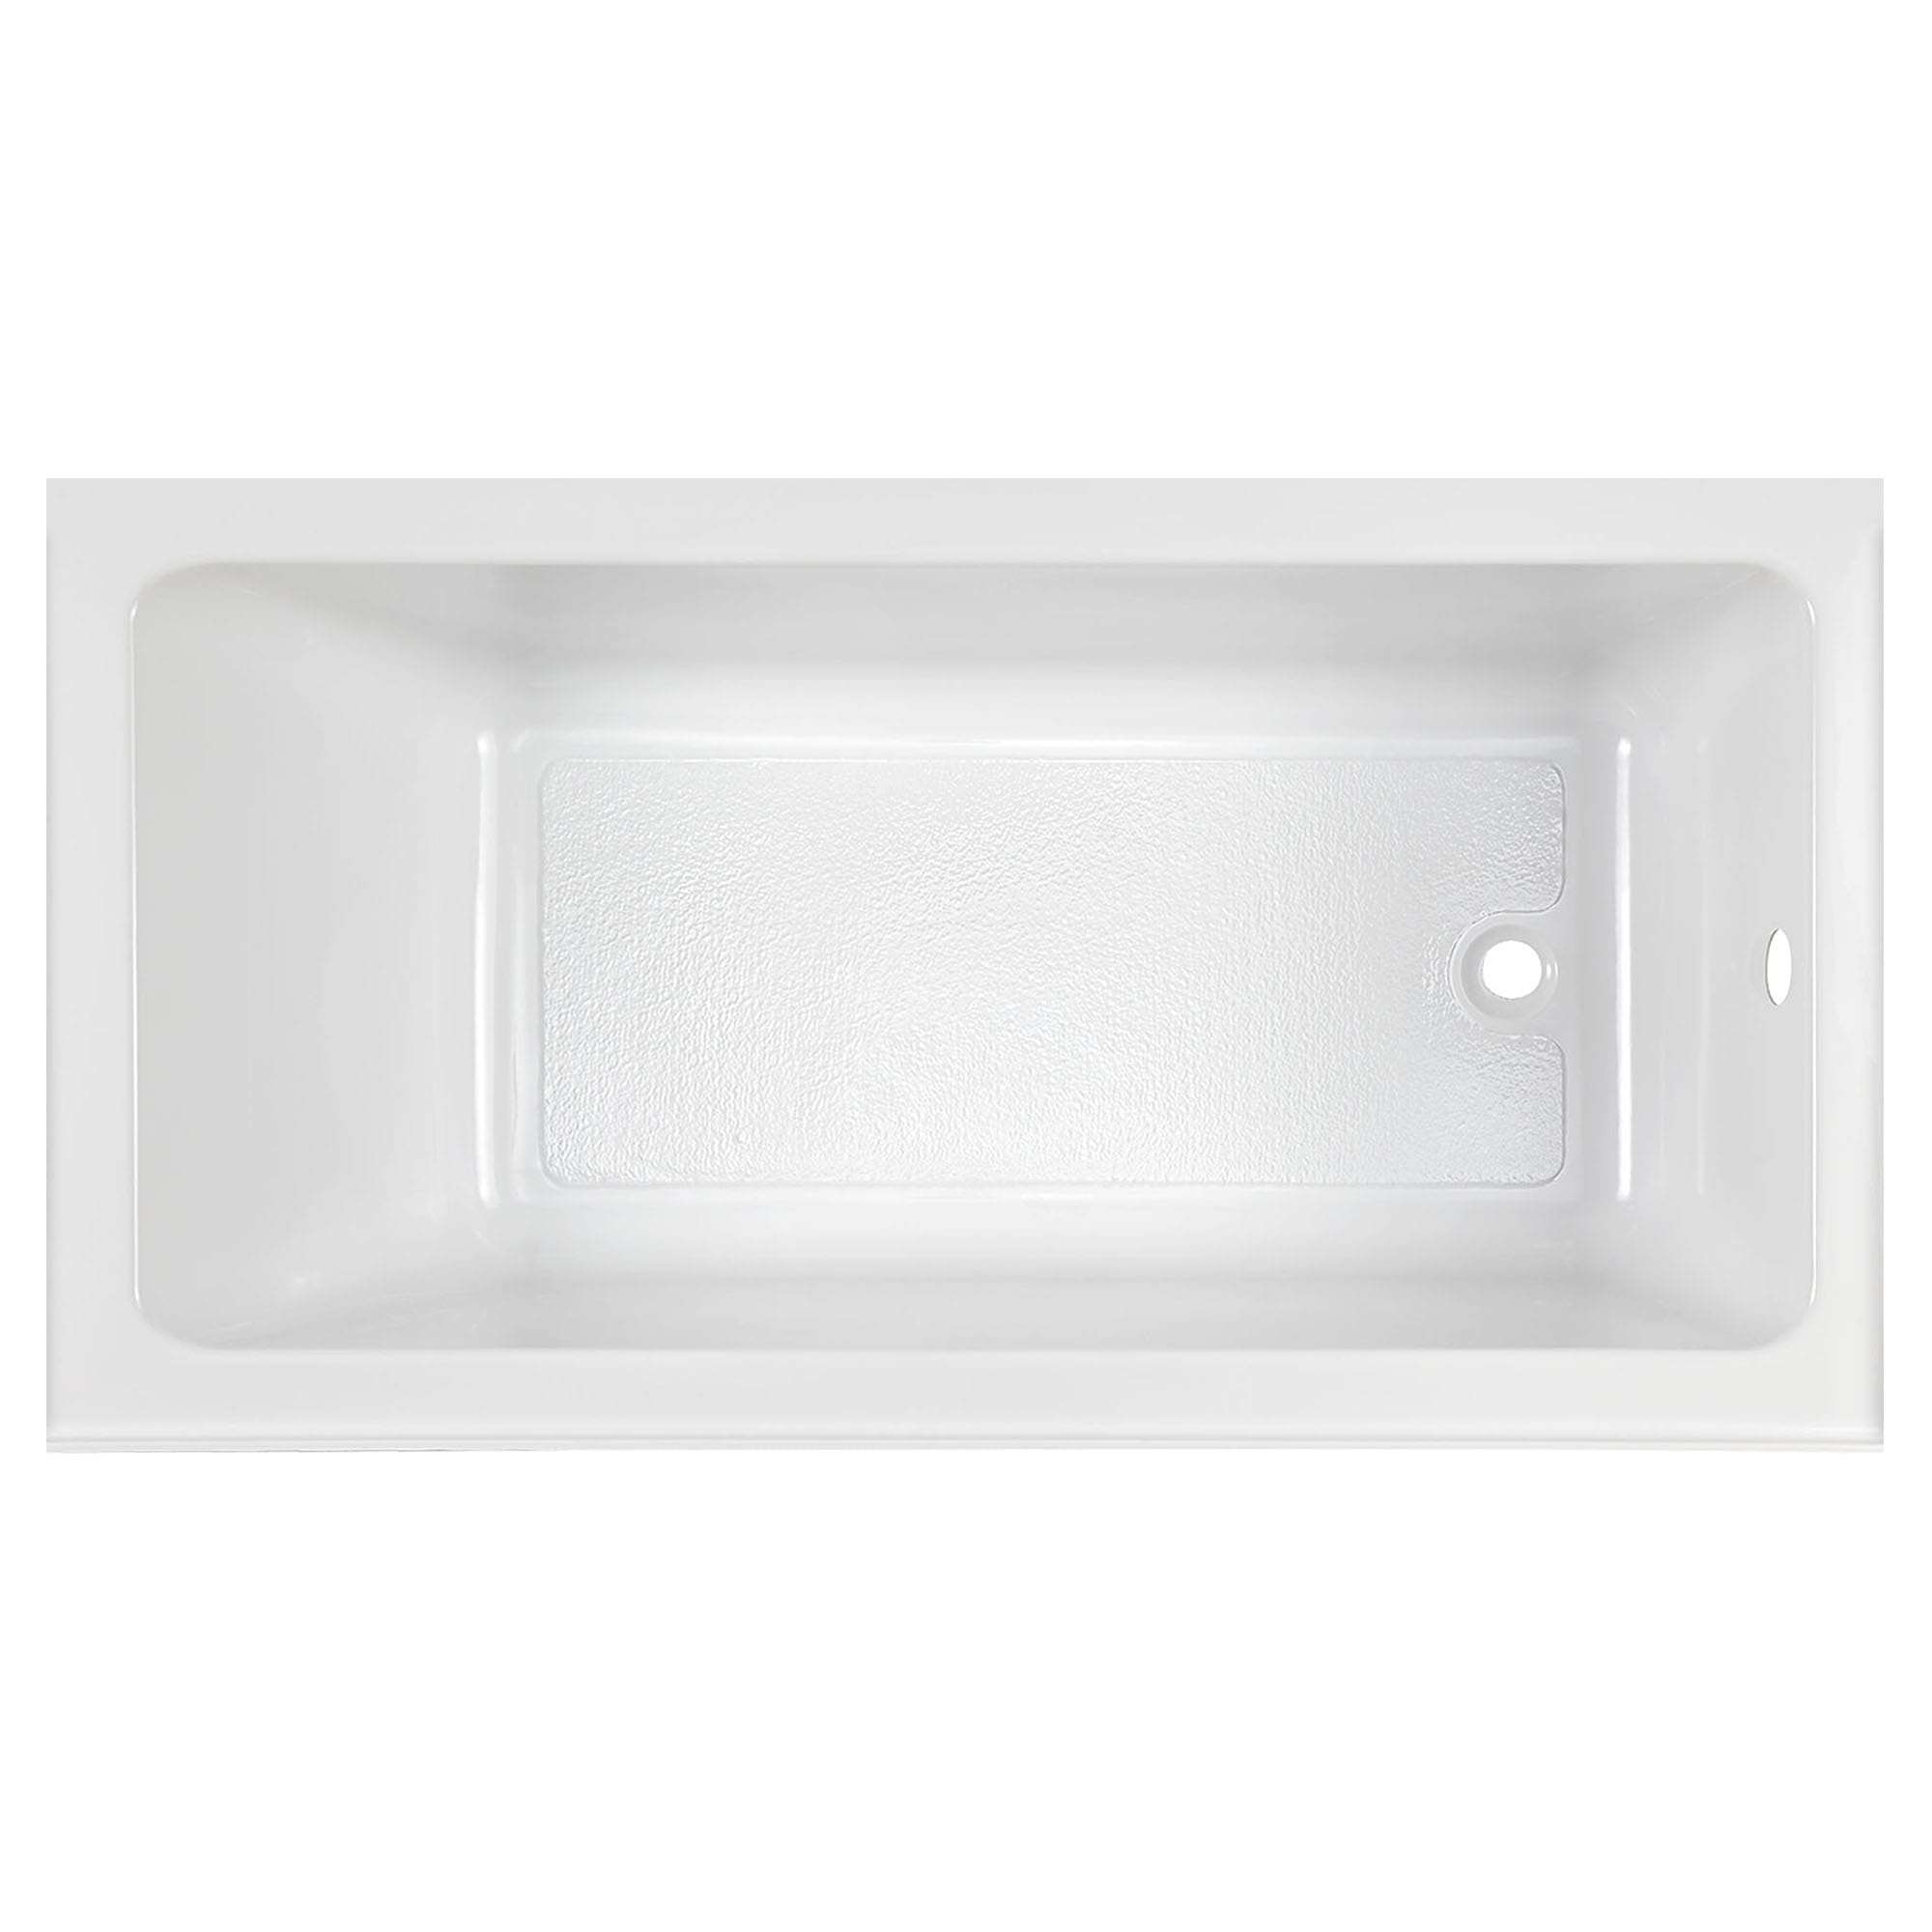 Studio® 60 x 30-Inch Integral Apron Bathtub Above Floor Rough with Right-Hand Outlet